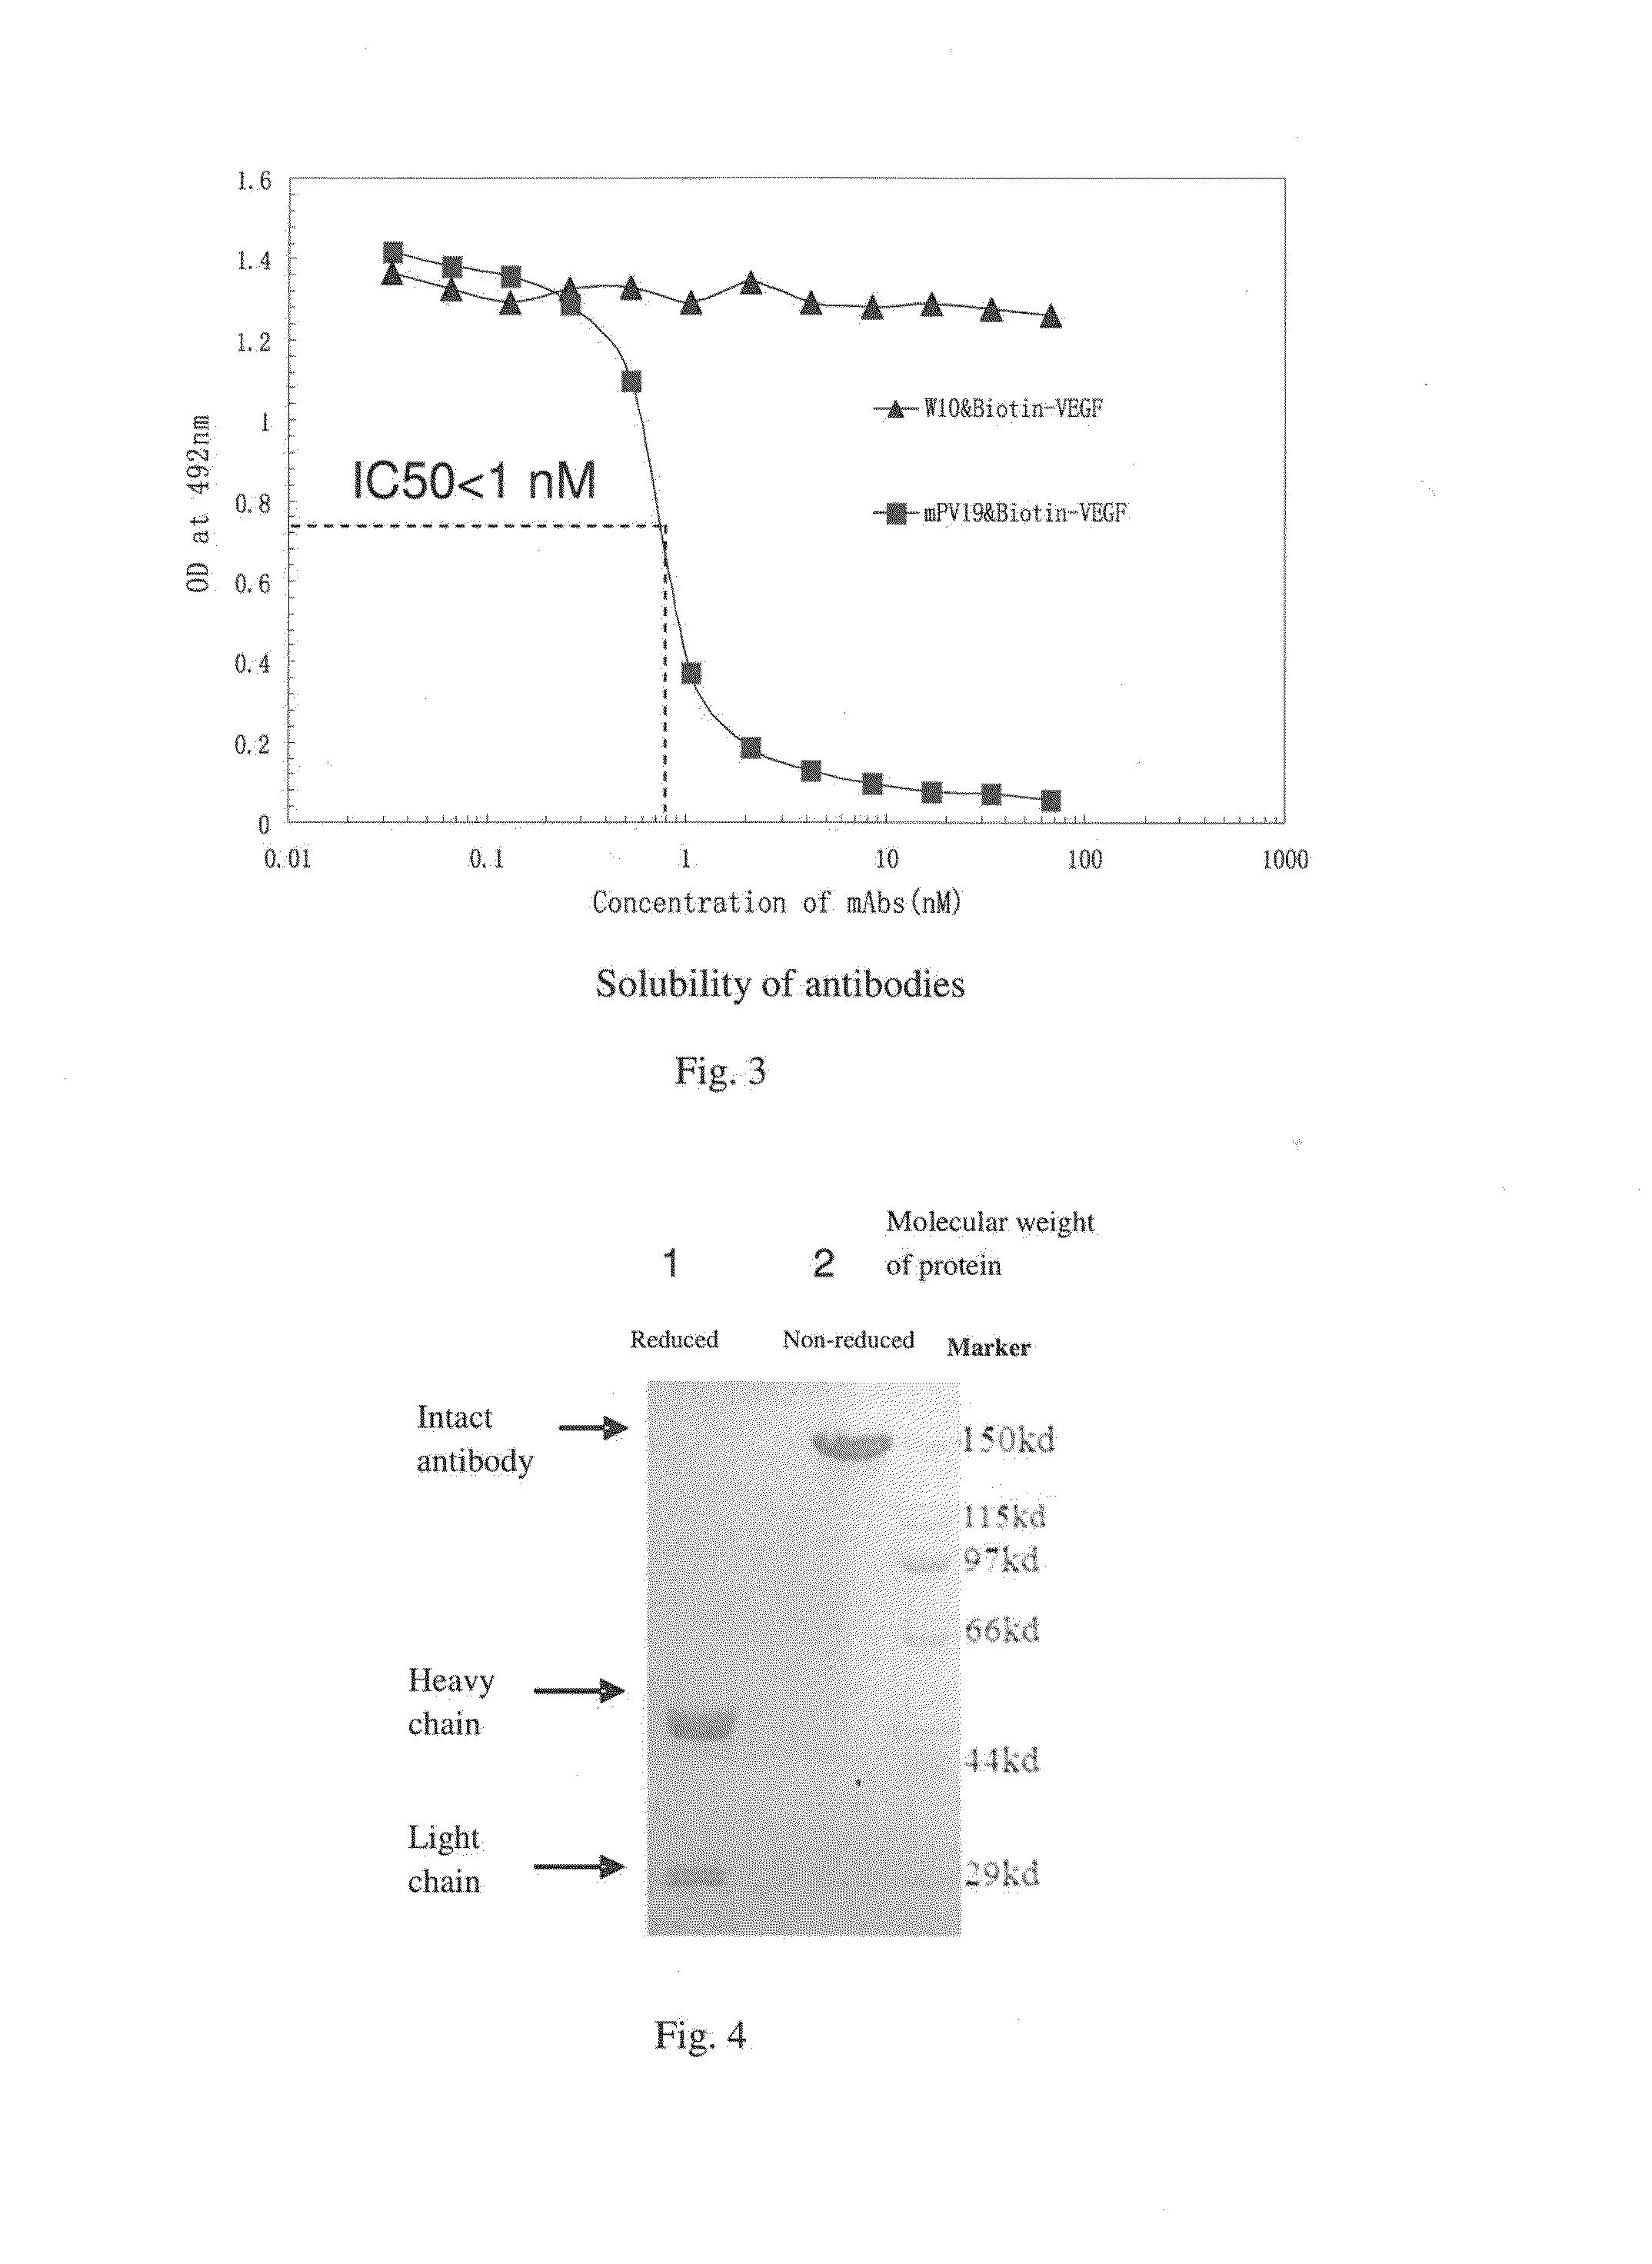 Monoclonal antibody for antagonizing and inhibiting binding of vascular endothelial cell growth factor and its receptor, and coding sequence and use thereof